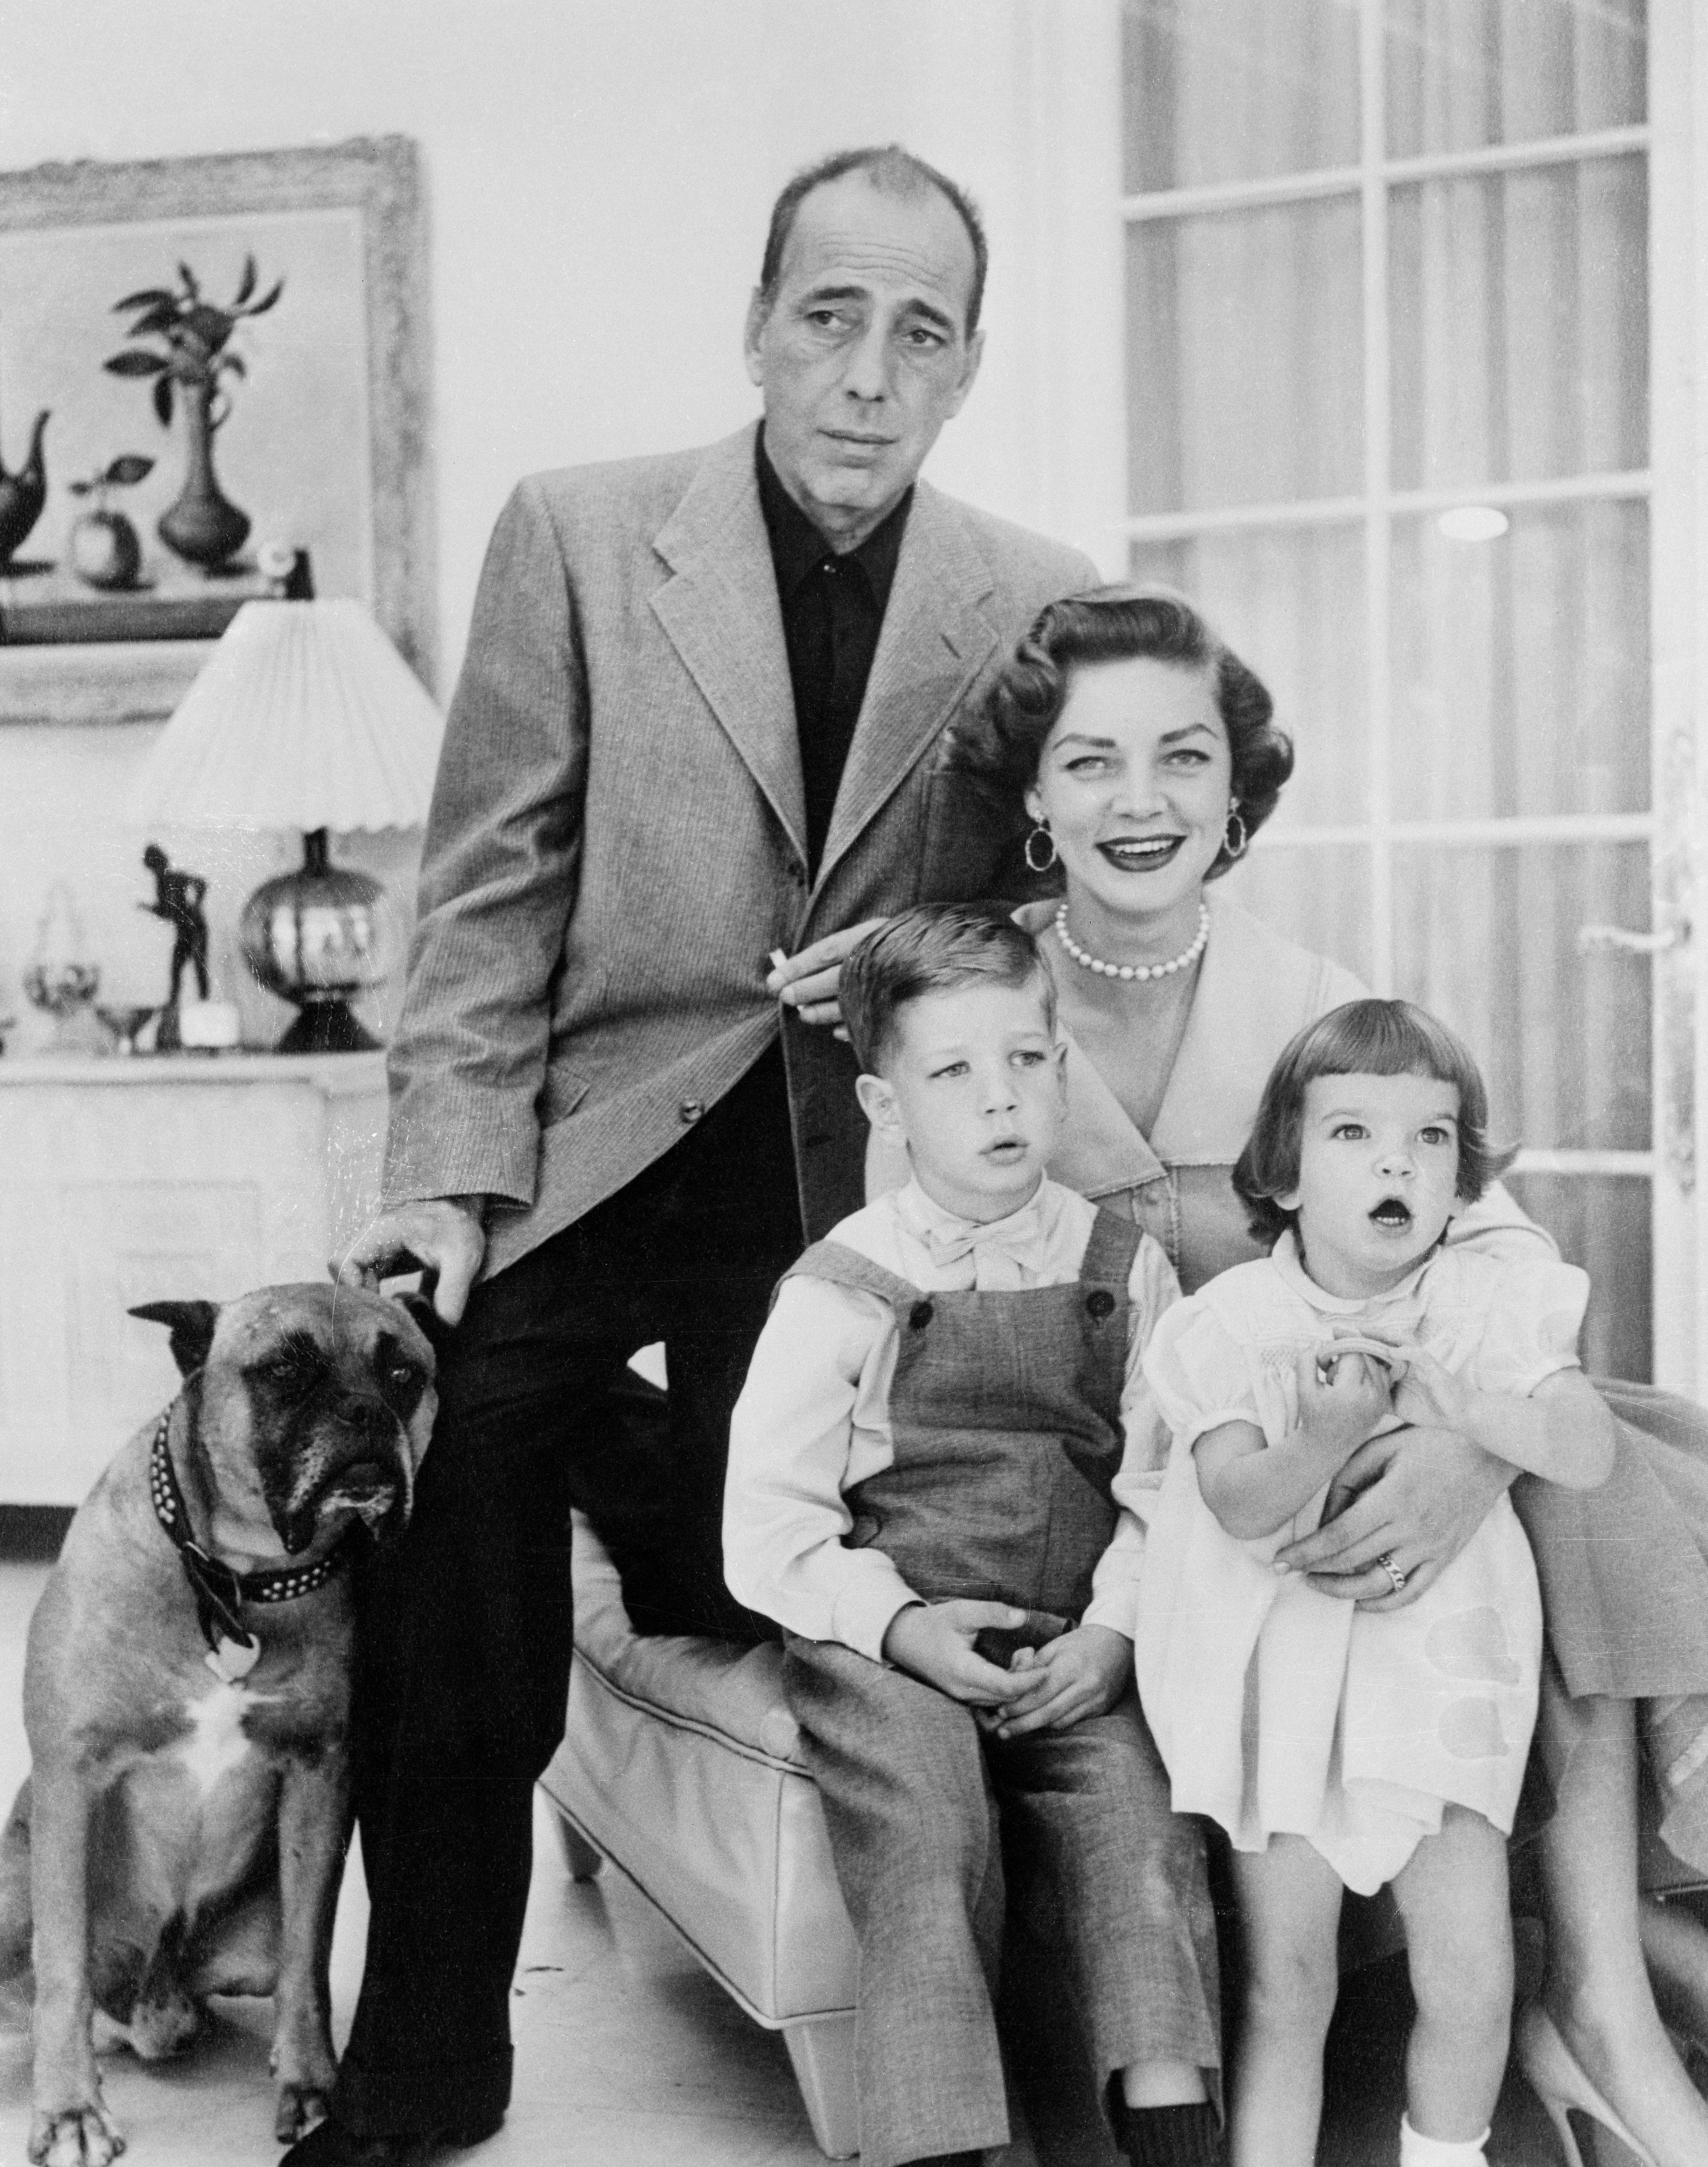 Humphrey Bogart and Lauren Bacall posing for a picture with their children Leslie and Stephen Bolgart on August 4, 1954. | Source: Getty Images